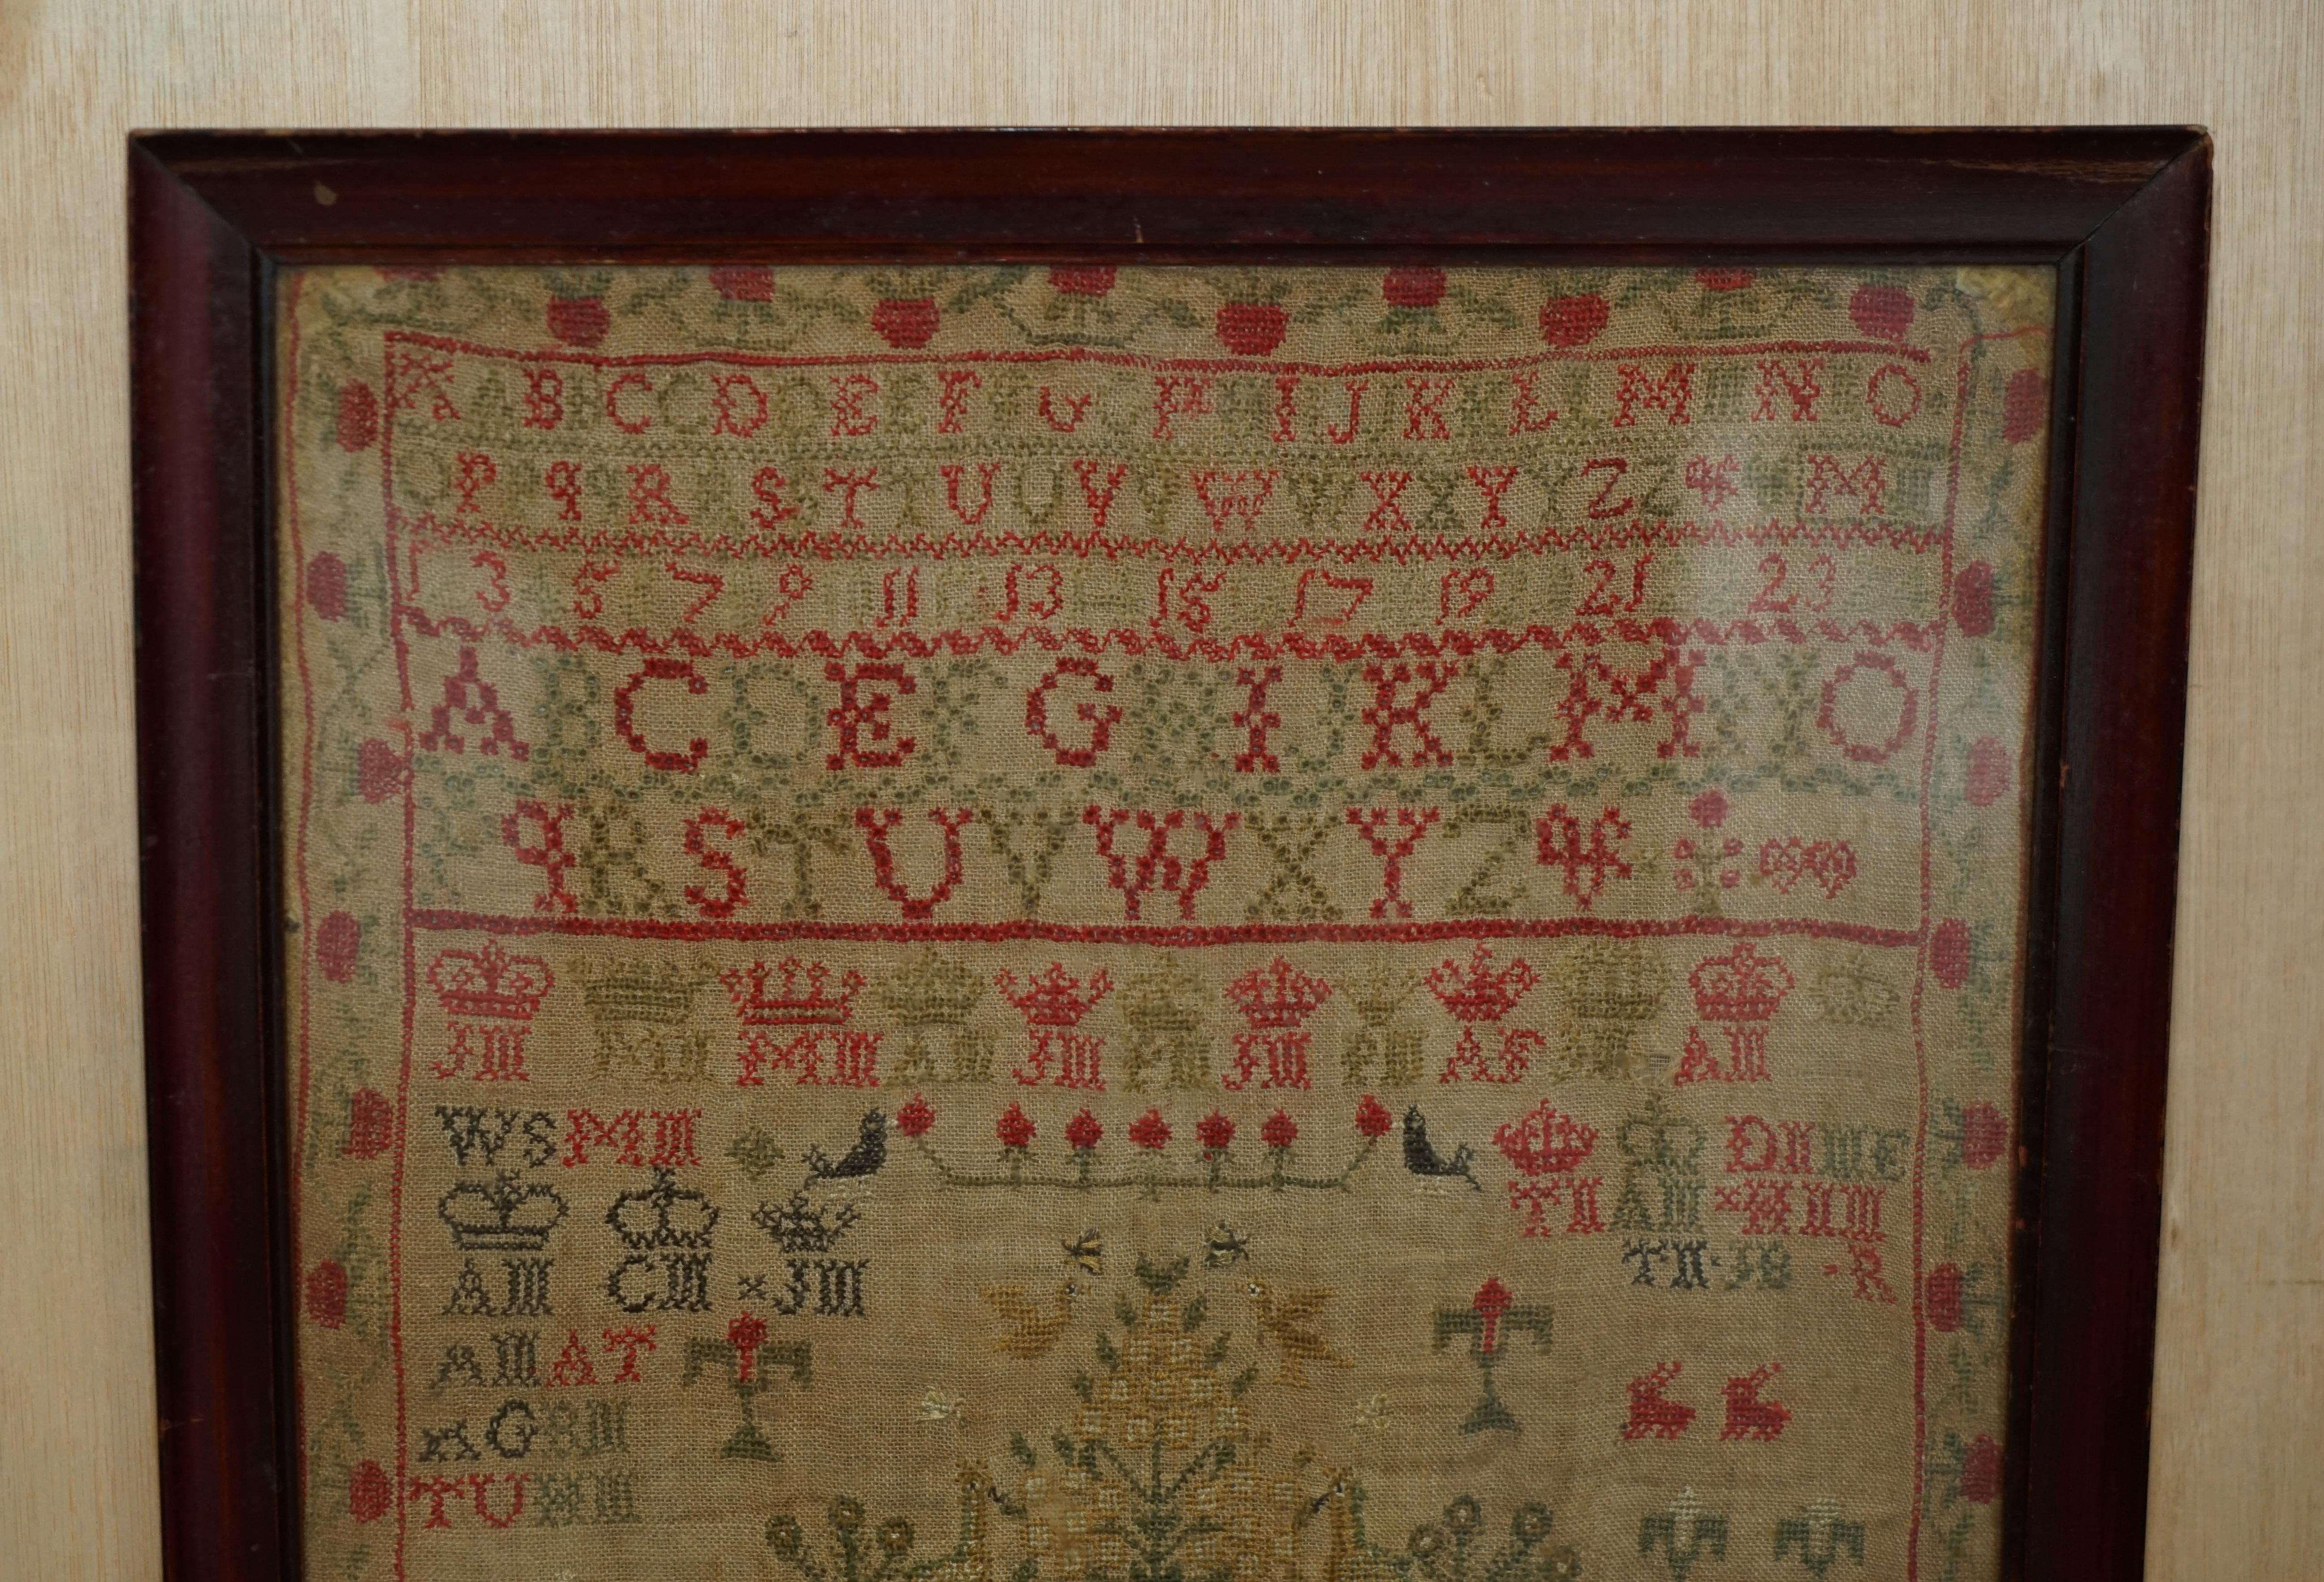 We are delighted to offer for sale this rather stunning, 1830 dated needlework sampler made by Margret McDonald age 10 from Scotland

I have three of these samplers for sale, they are dated 1830, 1747 and 1888, this sale is for the one mentioned